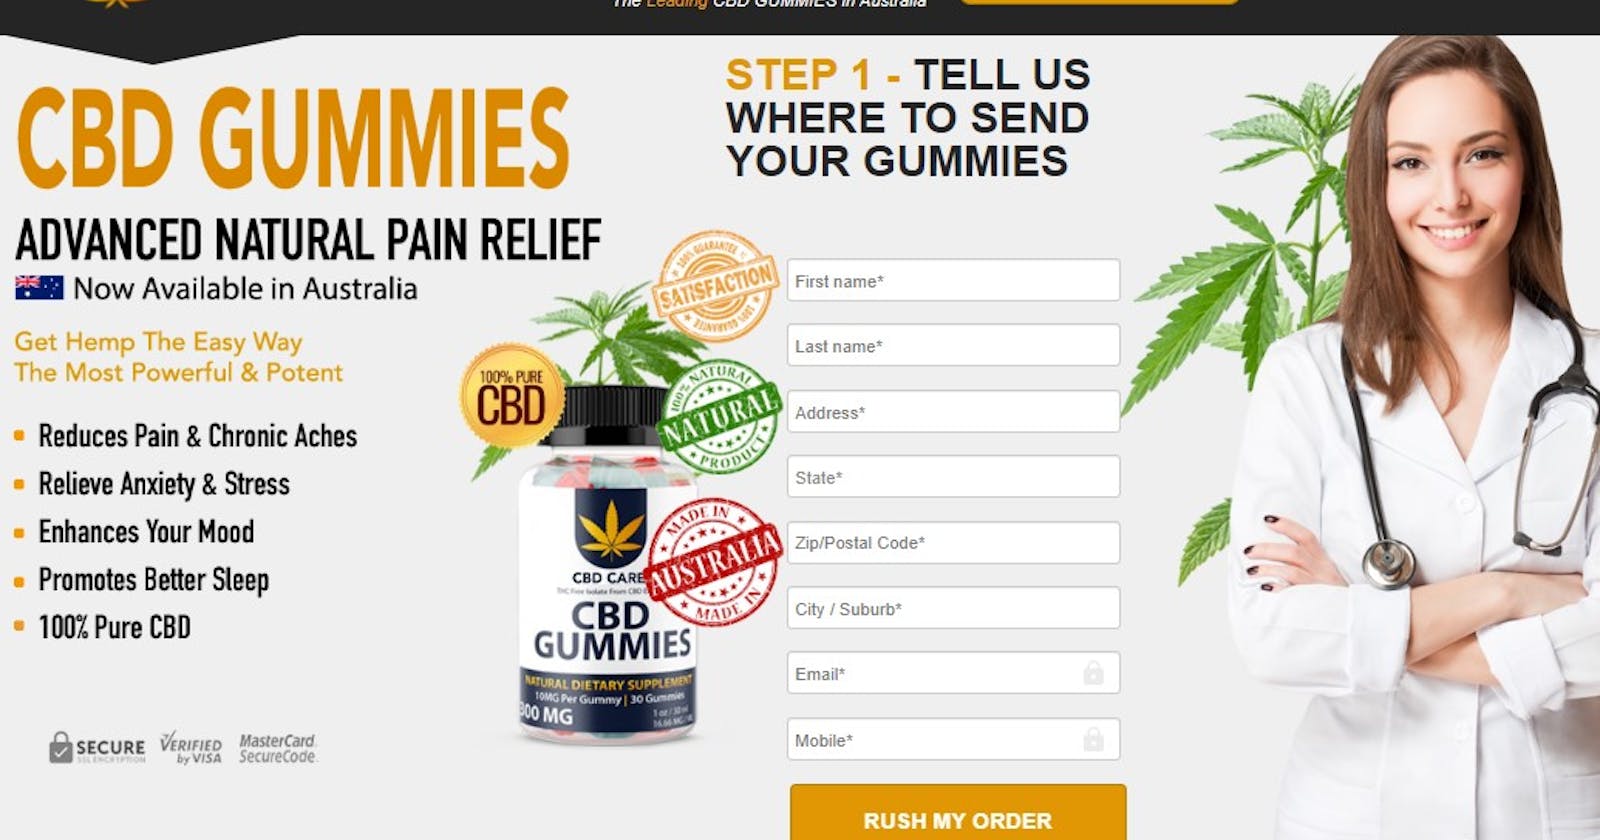 CBD Care CBD Gummies [2023 UPDATED OFFERS](Spam Or Legit) CLICK HERE AND GET *EXCITING DEALS*!!